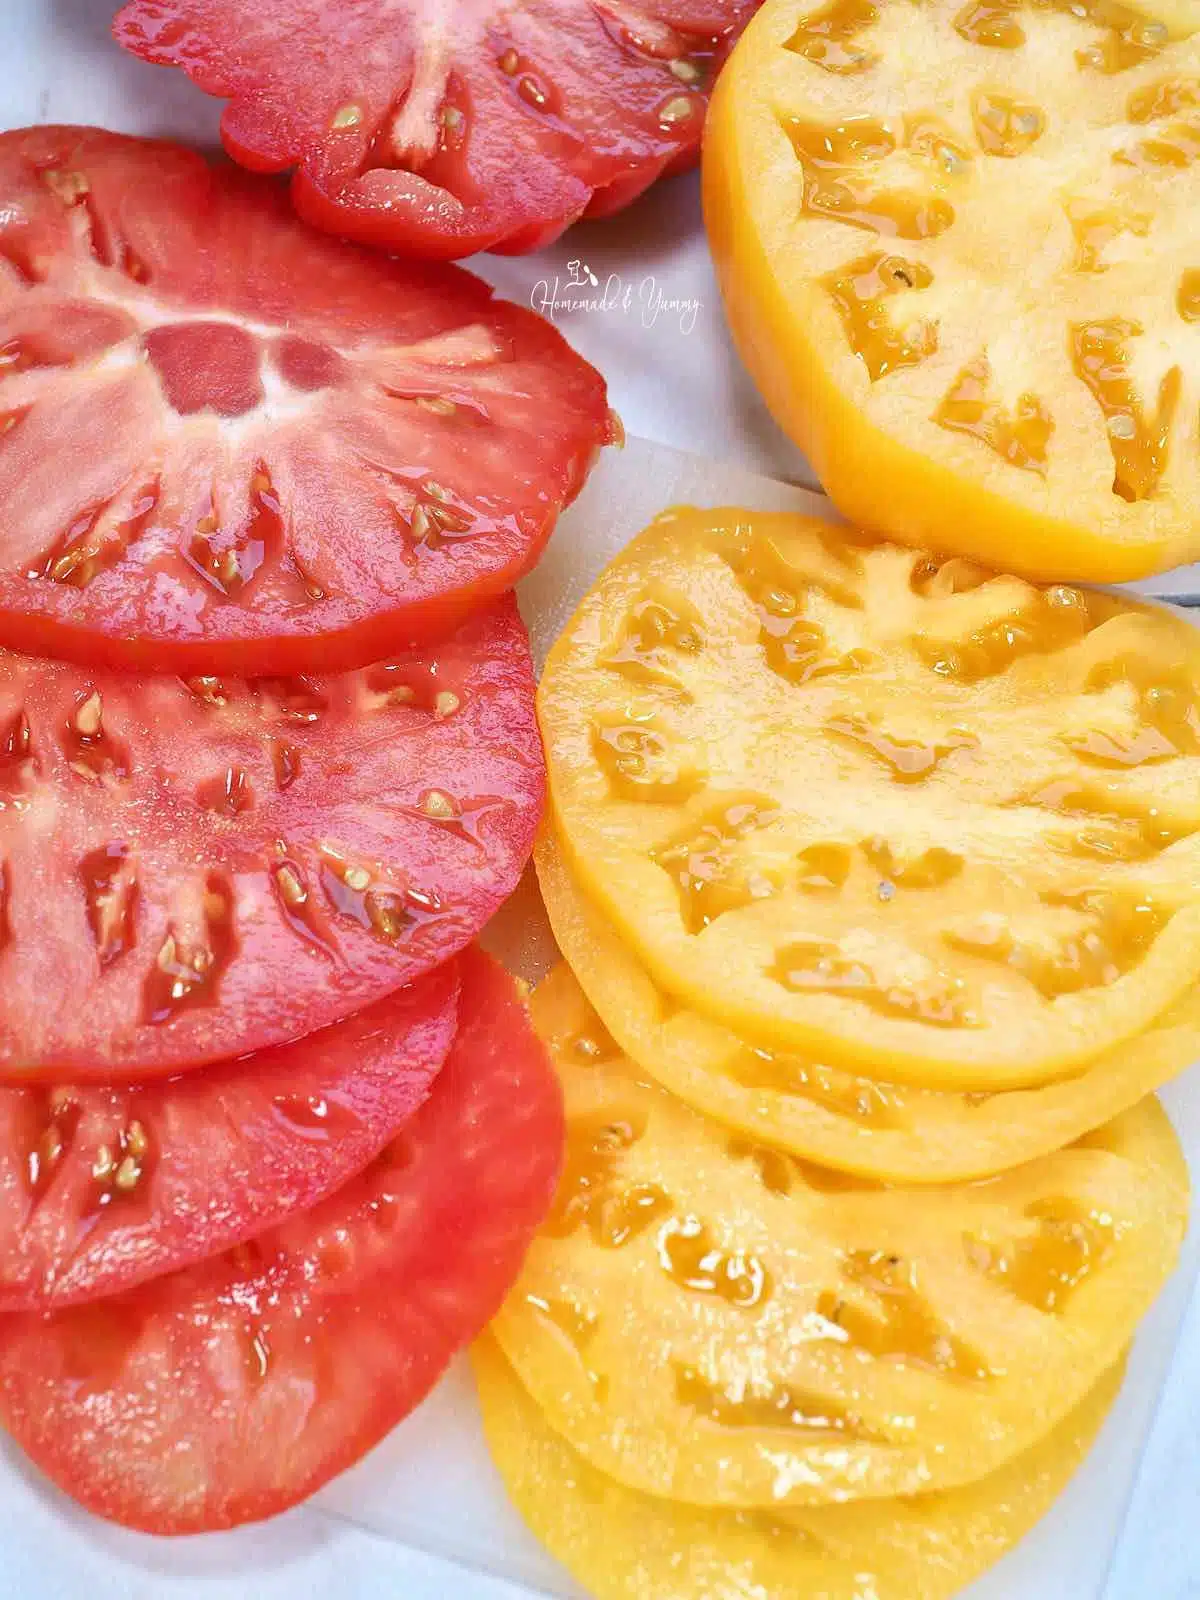 Slices of heirloom tomatoes to put on sandwiches.